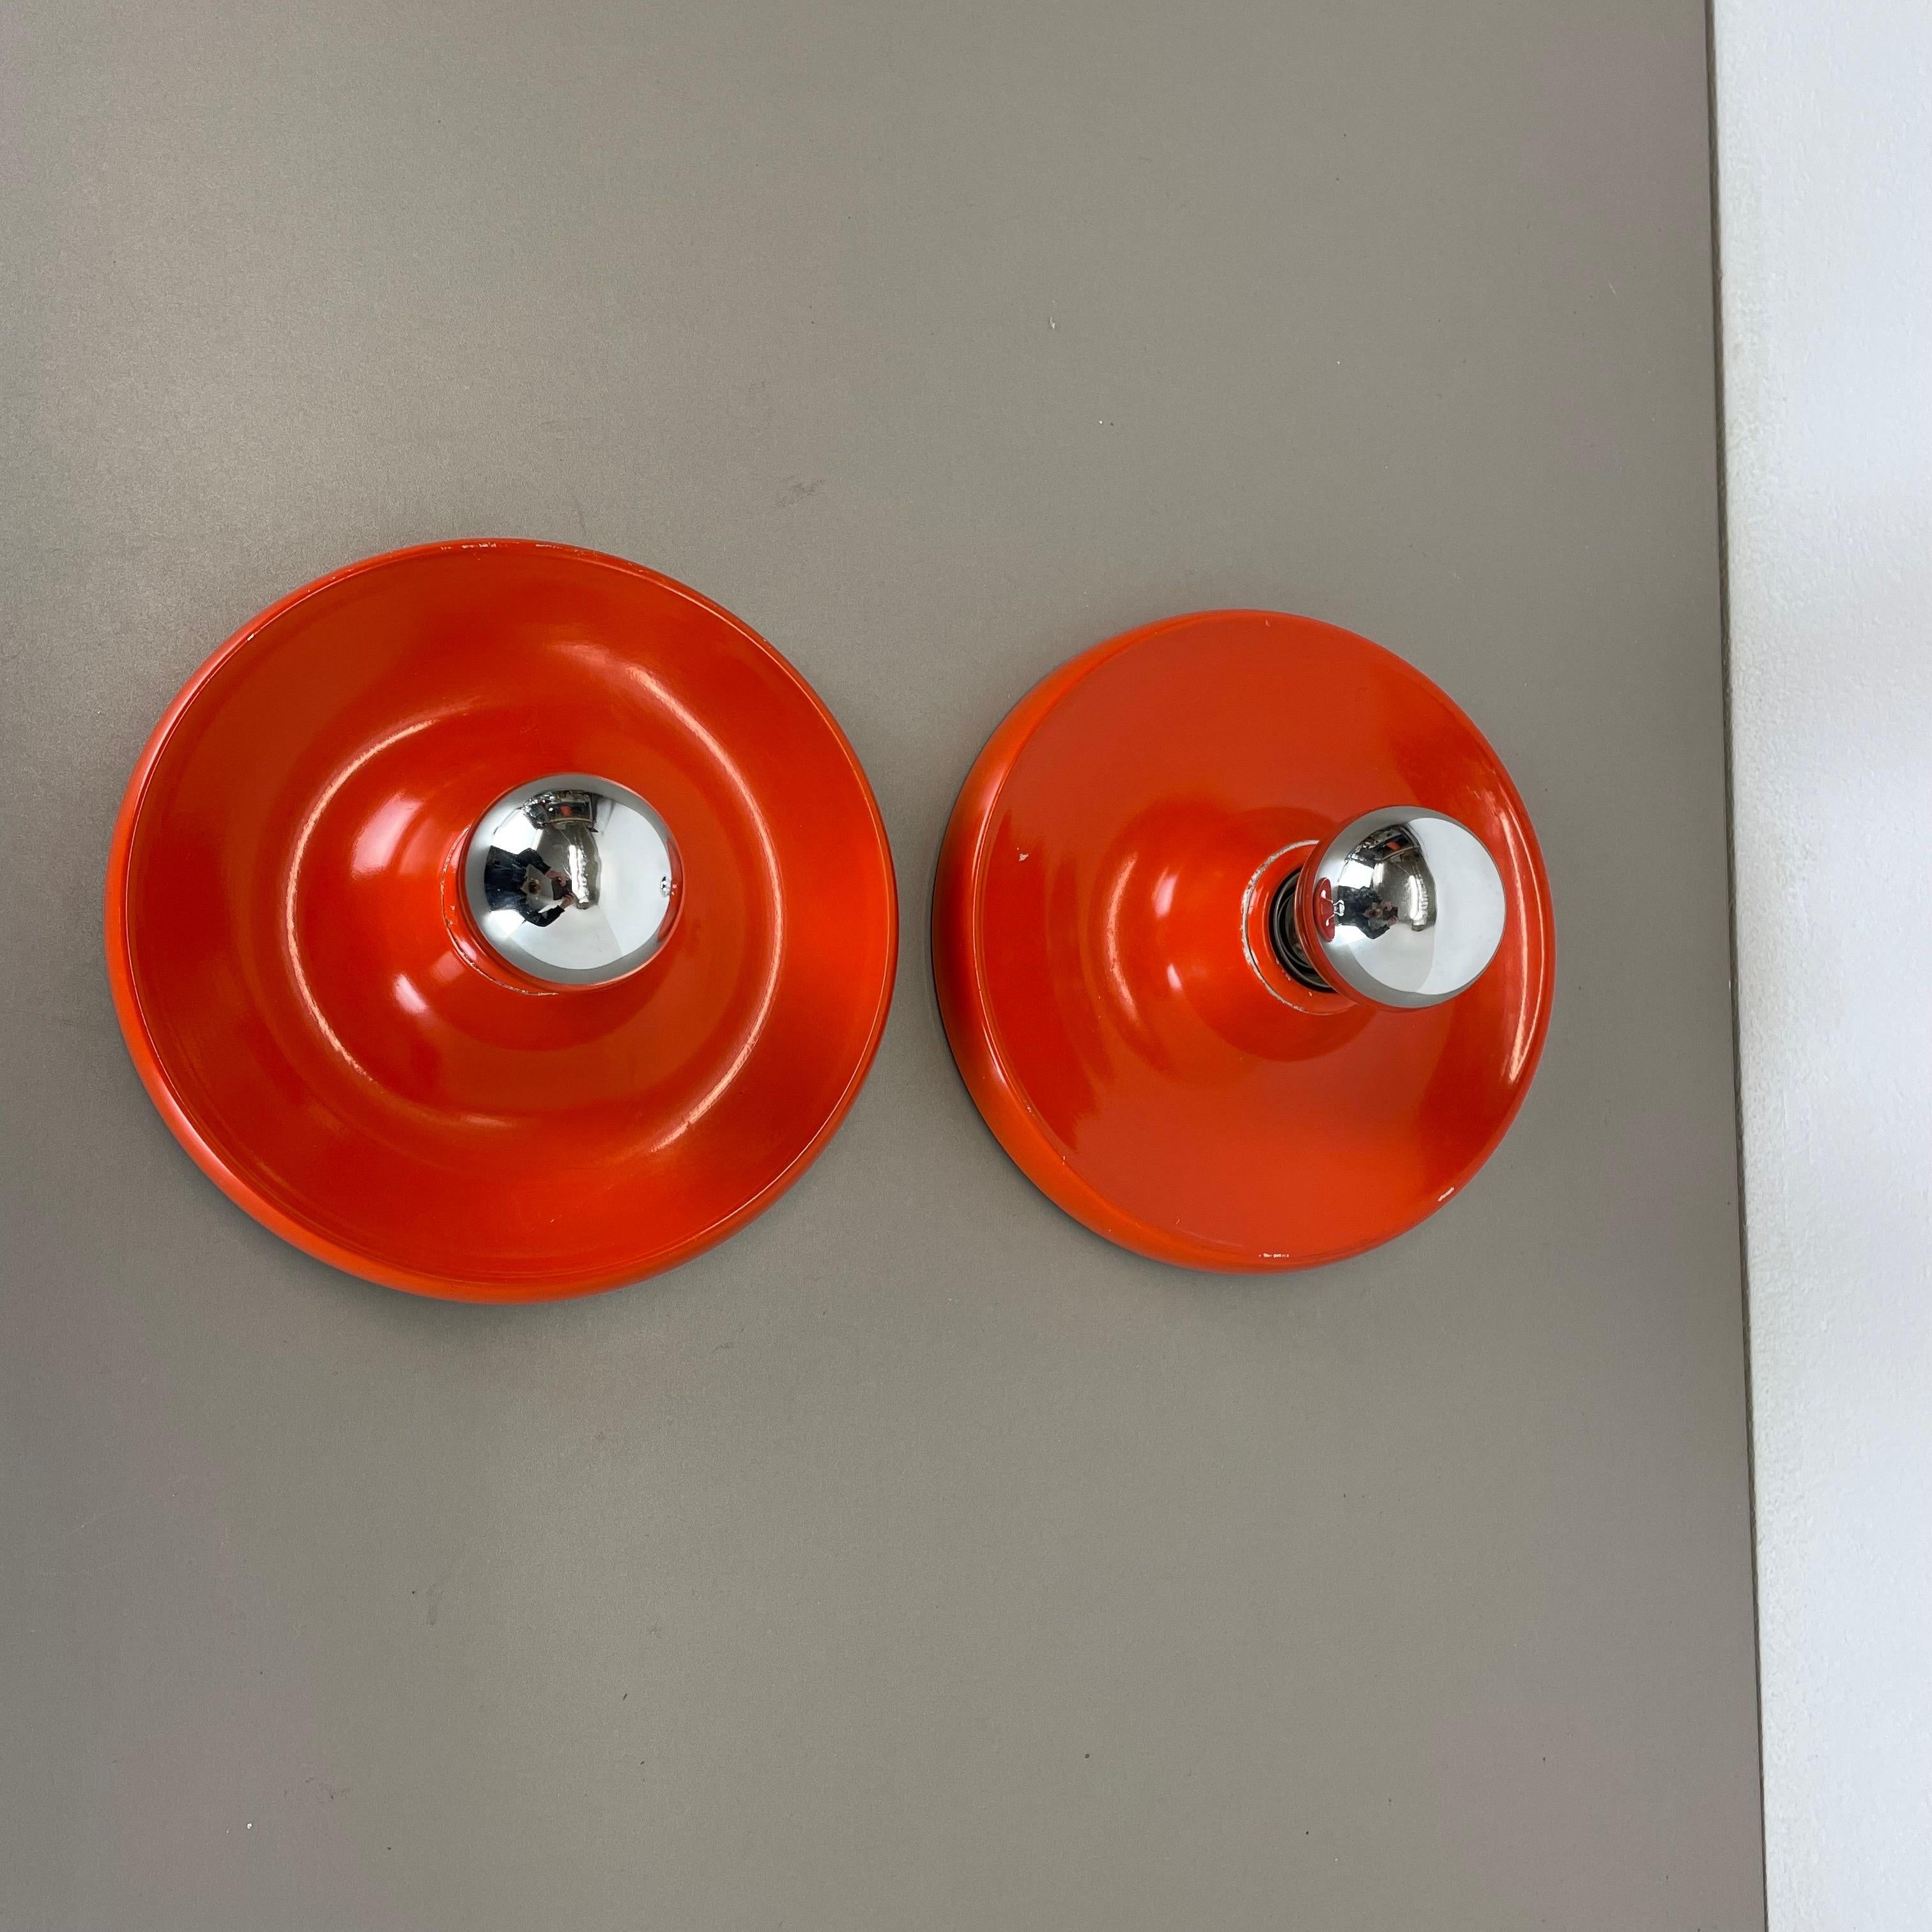 Article:

Wall light sconce set of 2


Producer:

Honsel Lights, Germany attributed to be produced by Honsel Ligjhts.



Origin:

Germany



Age:

1970s



Description:

Original 1970s modernist German wall light made of